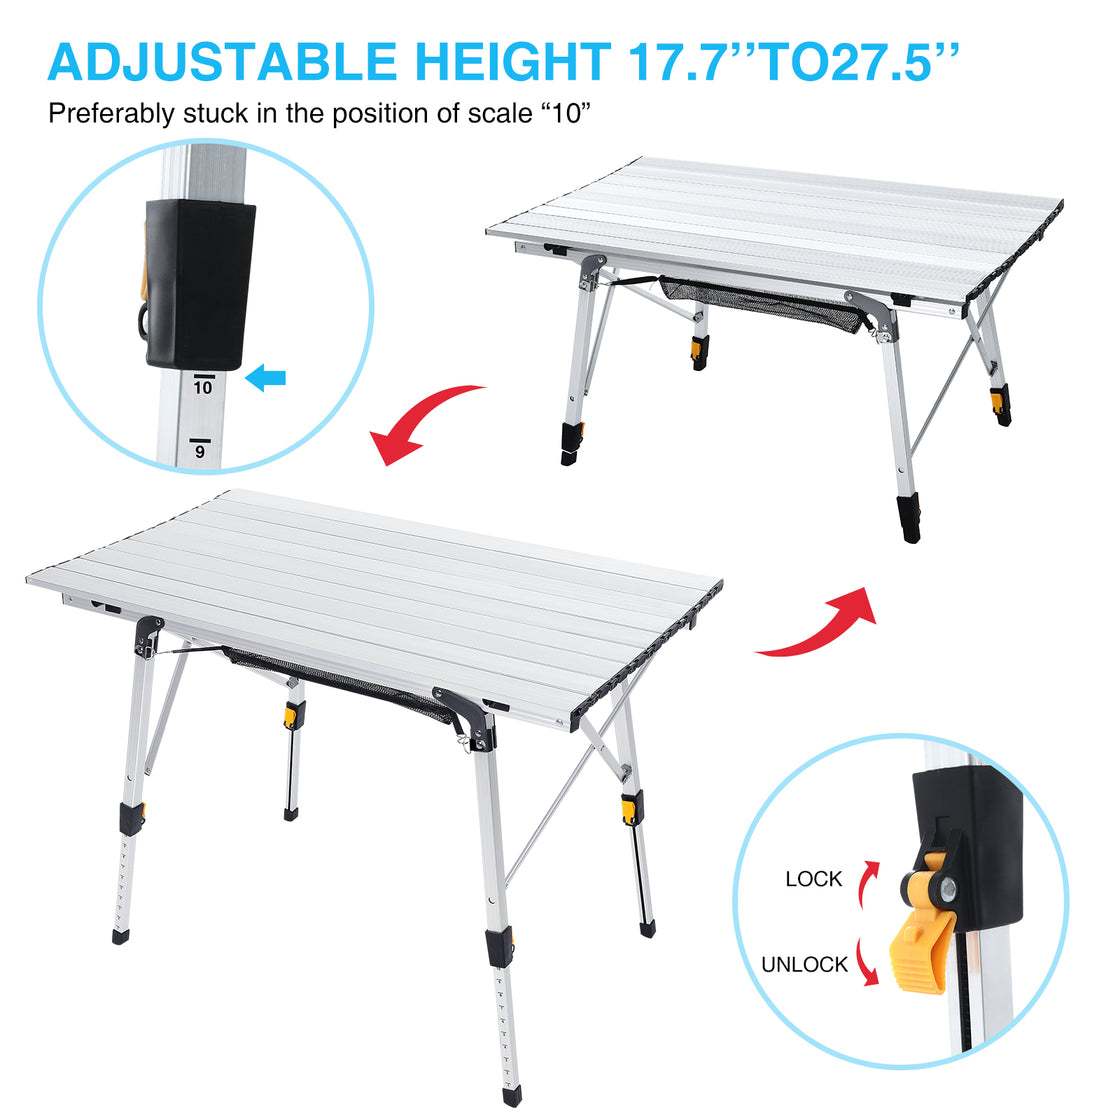 Brace Master Camping Table Folding Portable Aluminum Picnic Table with Tablecloth